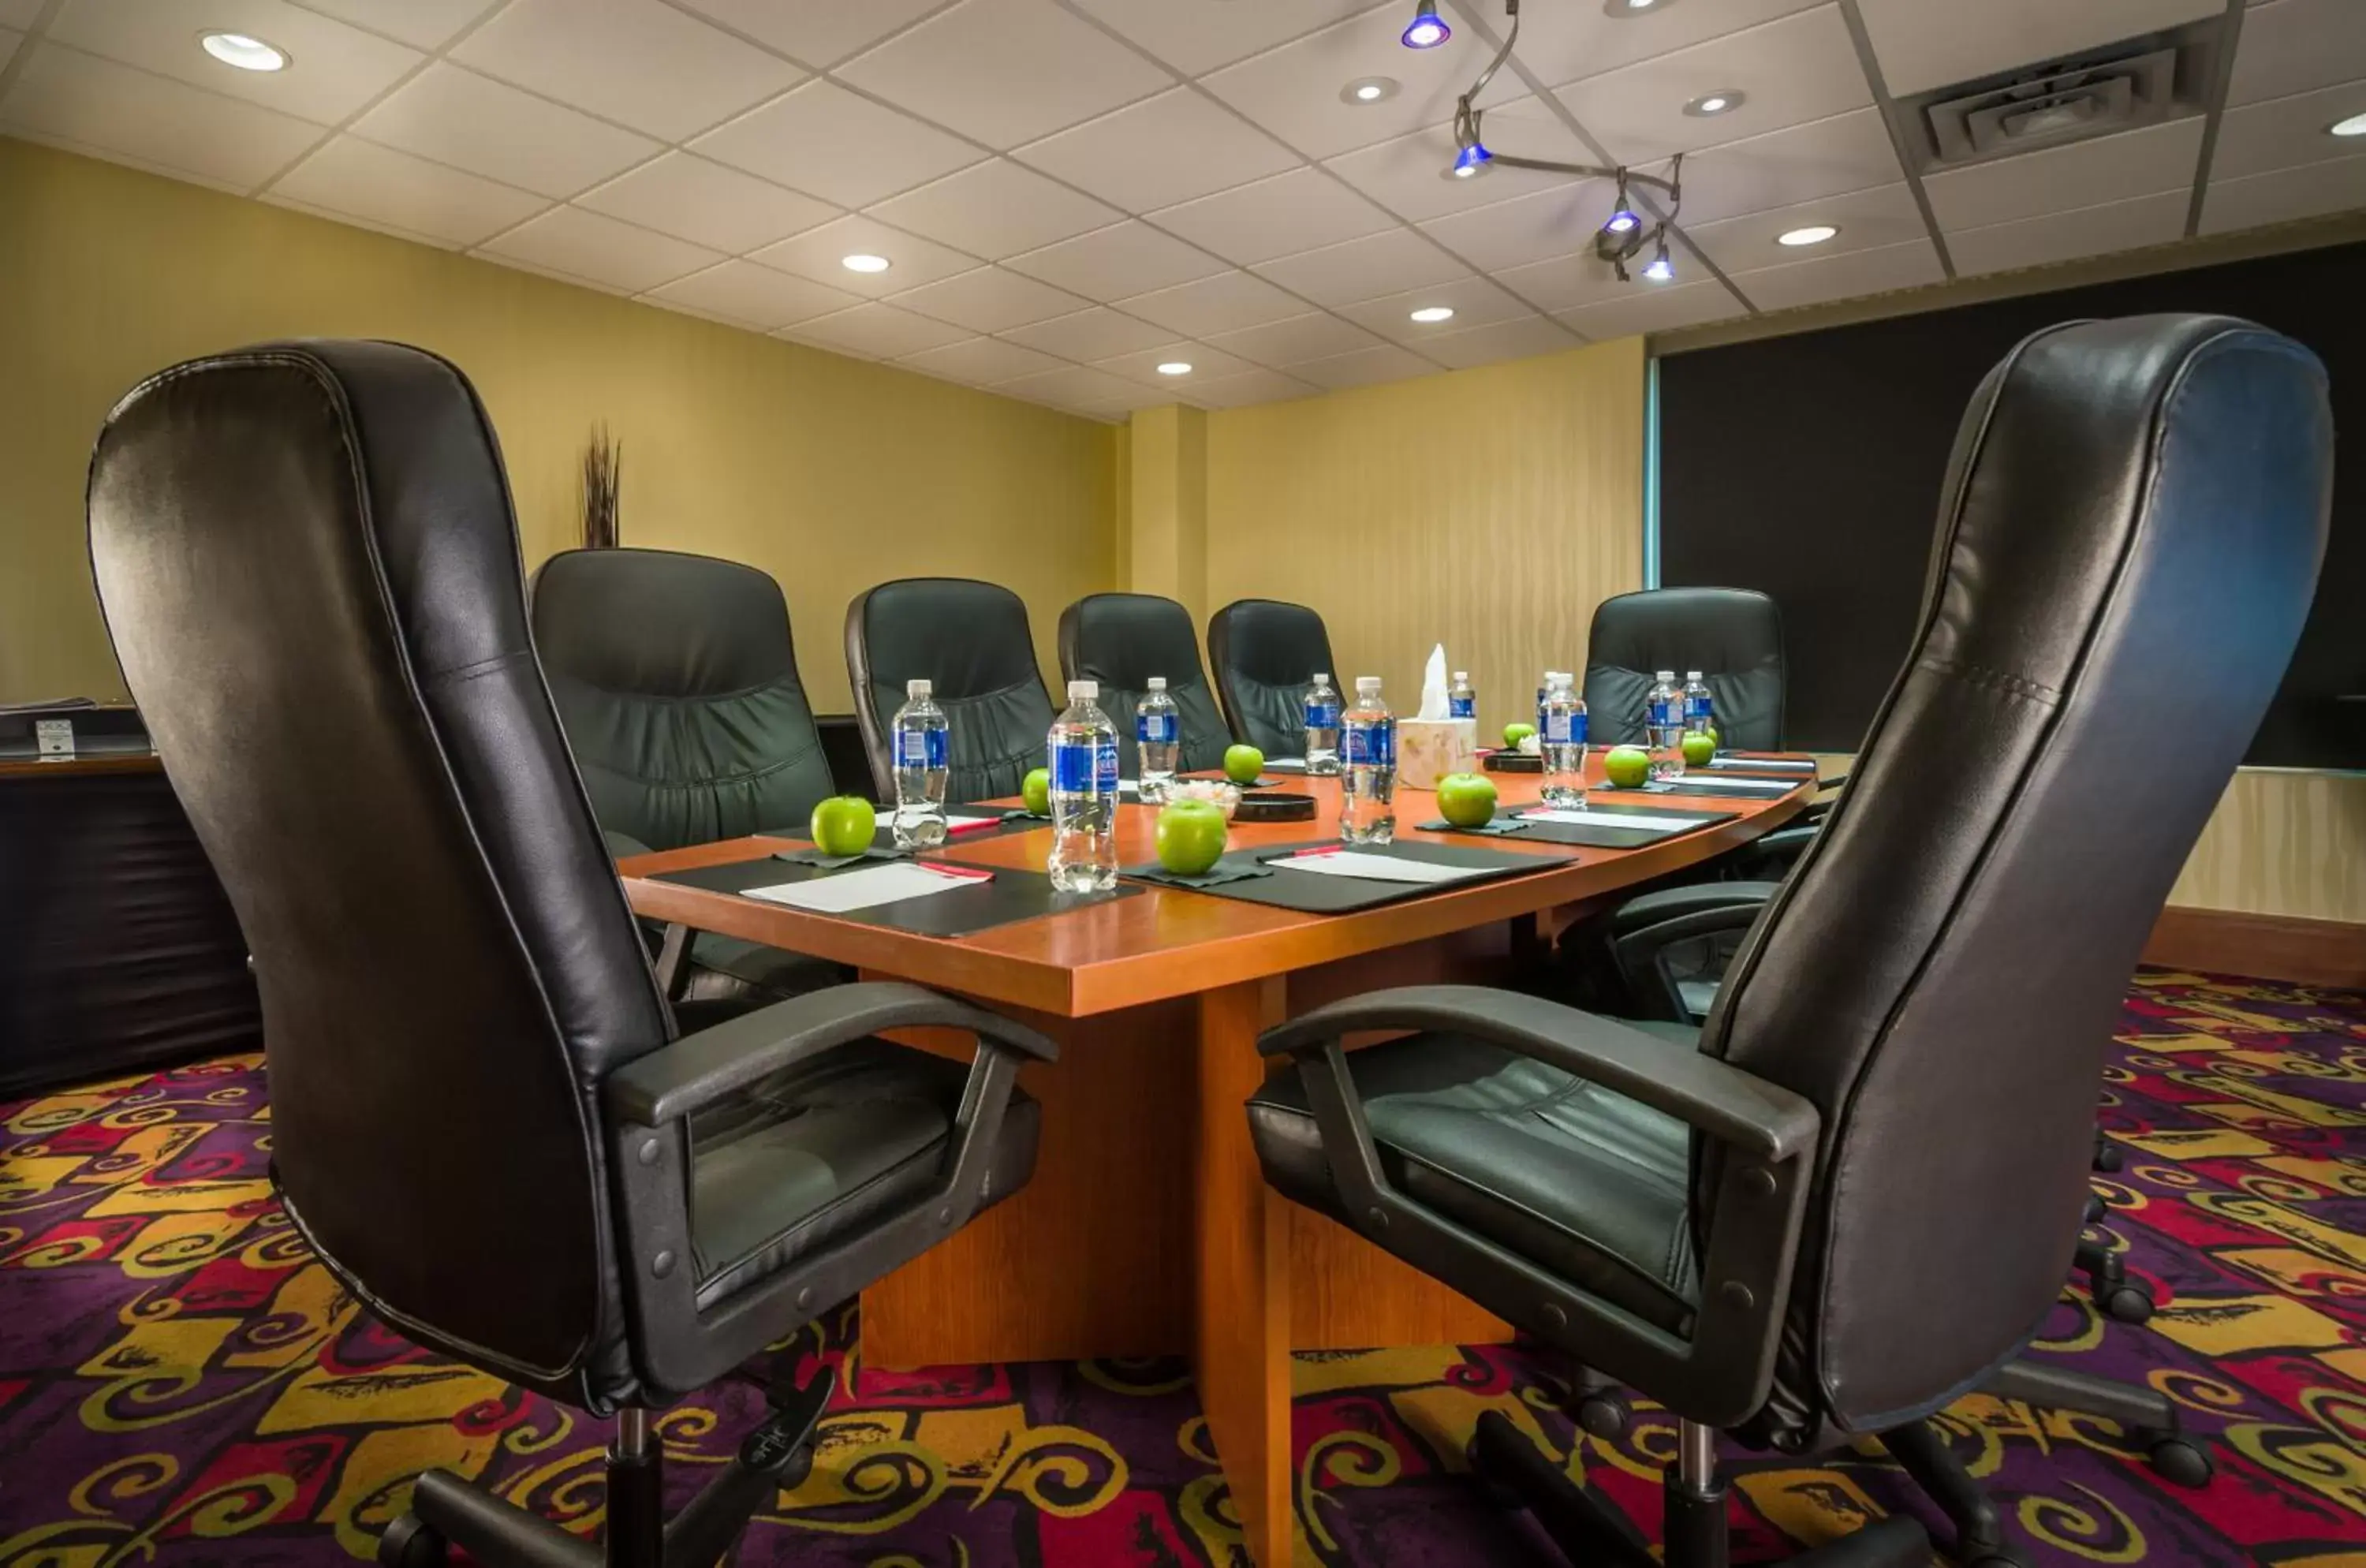 Banquet/Function facilities in Deerfoot Inn and Casino